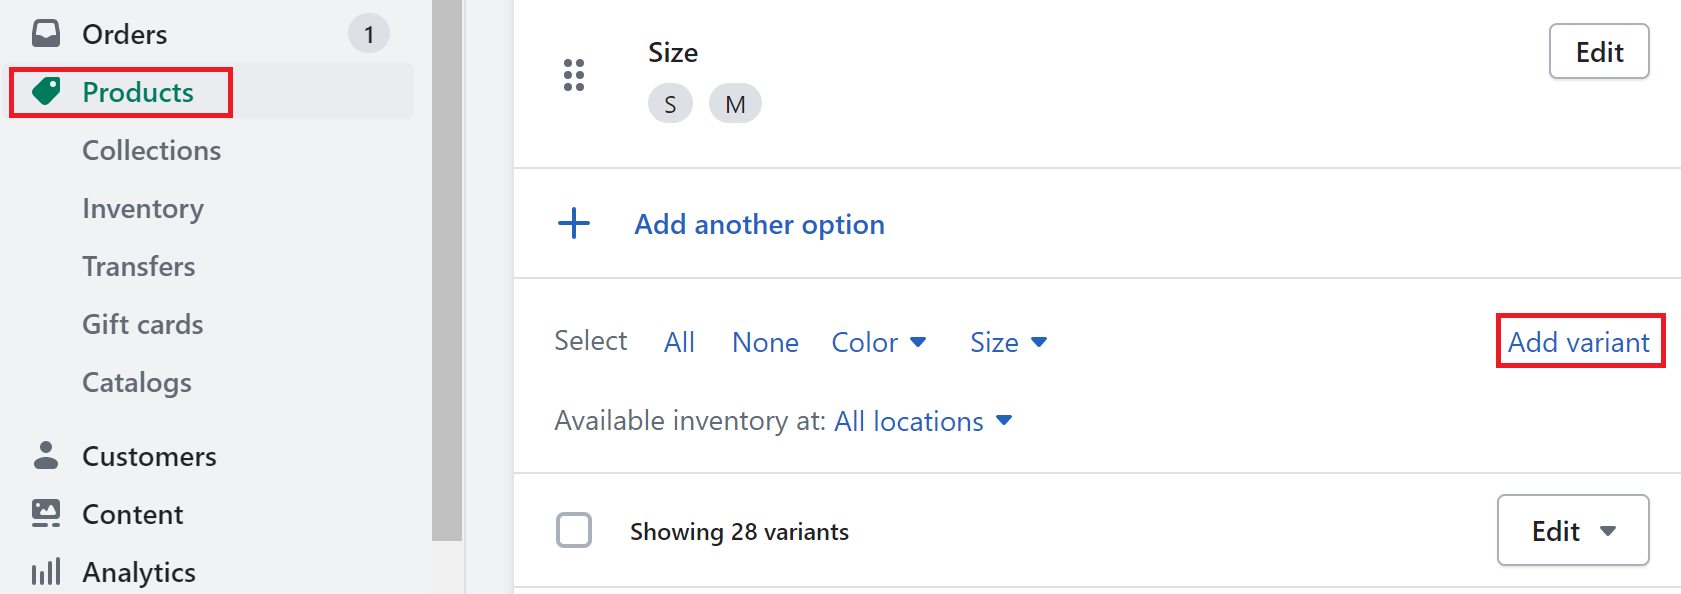 add image to products variant in shopify - shopify image size